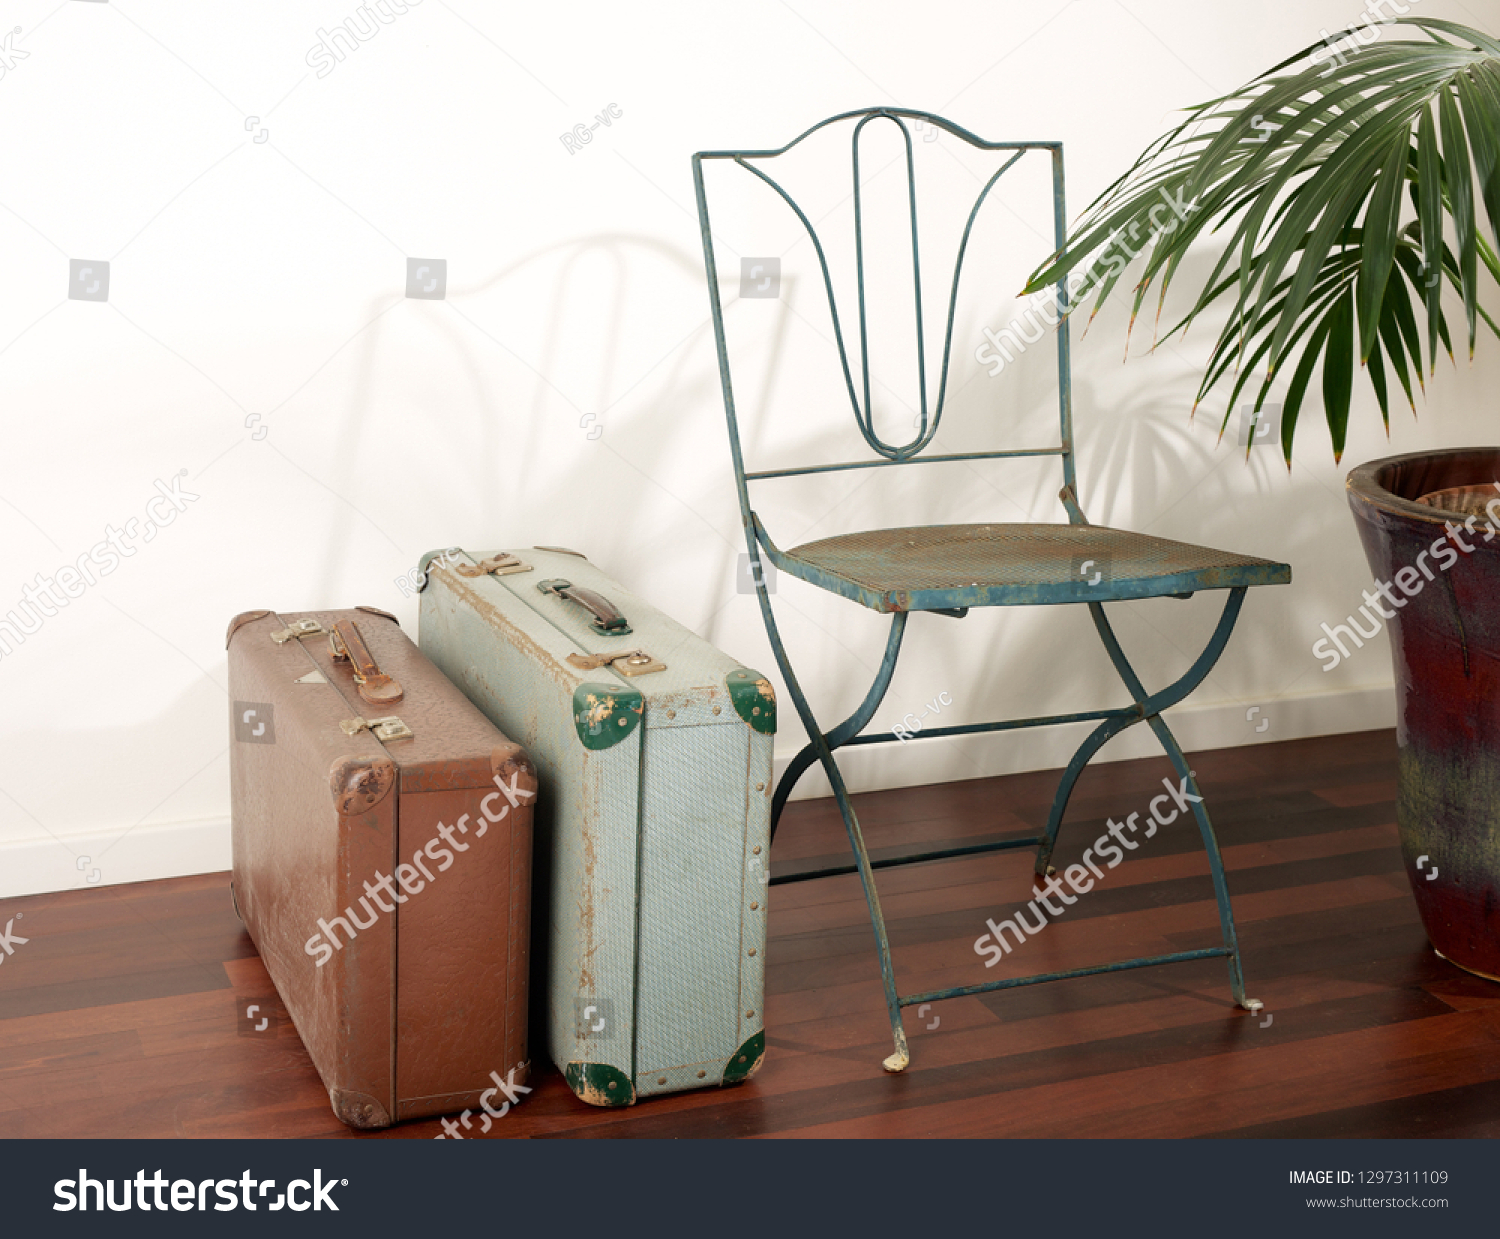 Two Old Retro Suitcases Vintage Metal Stock Image Download Now